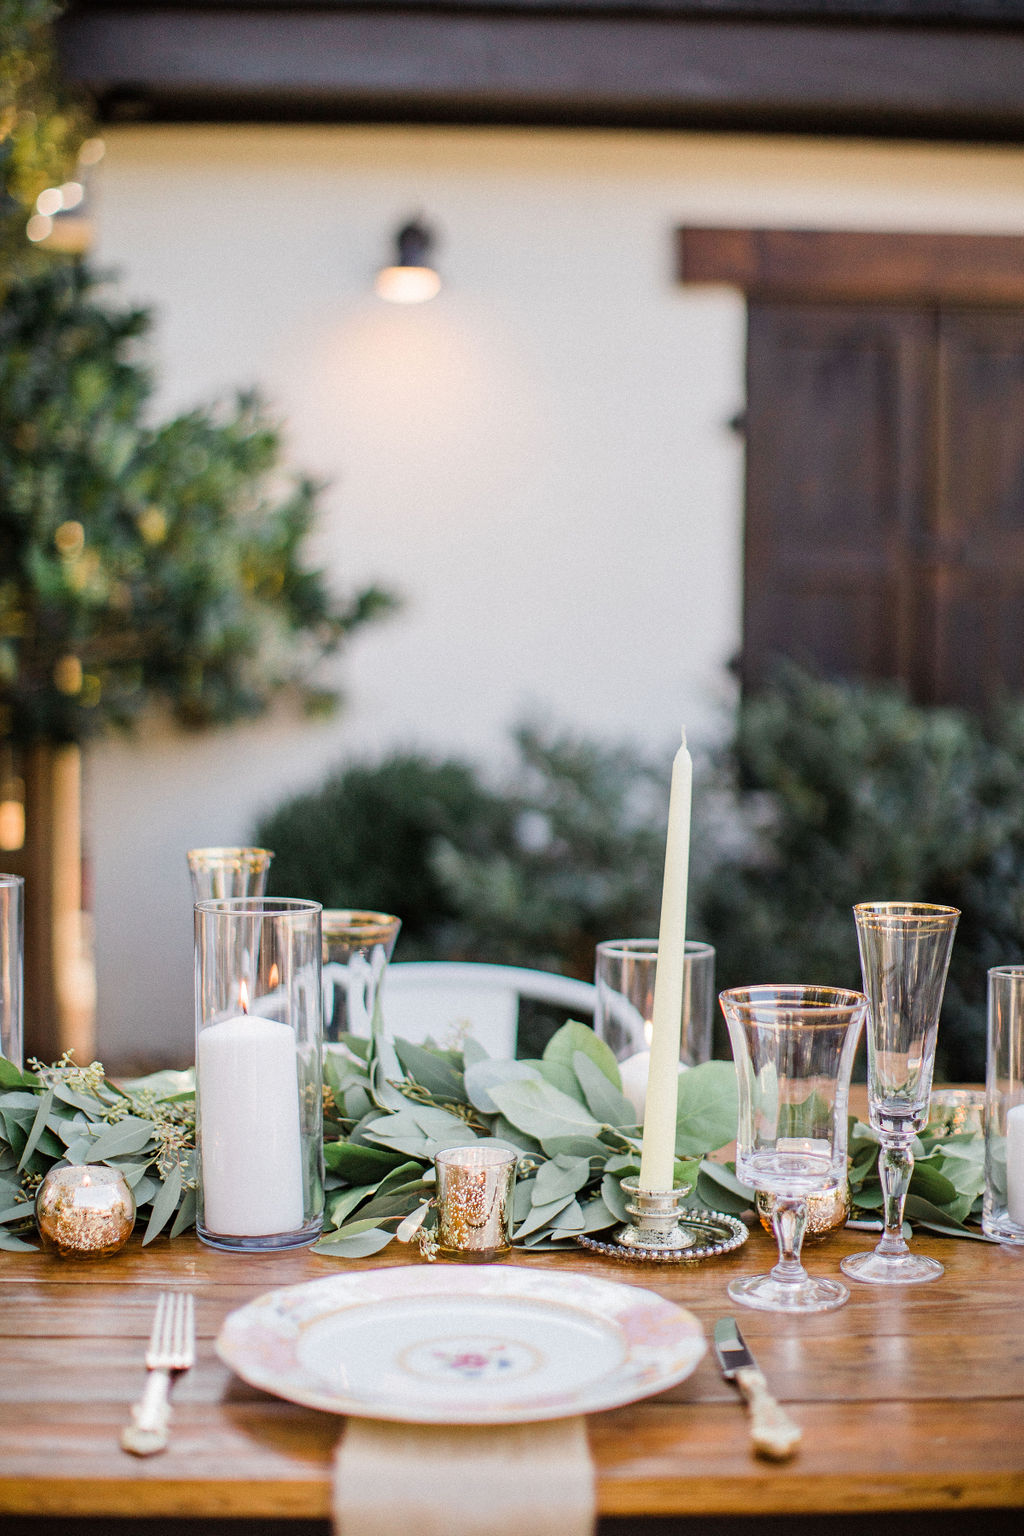 Intimate Vintage Garden Wedding / Planning by Lucky Day Events Co. / Photo by Danielle Riley / The Parlour at Mann's Chapel